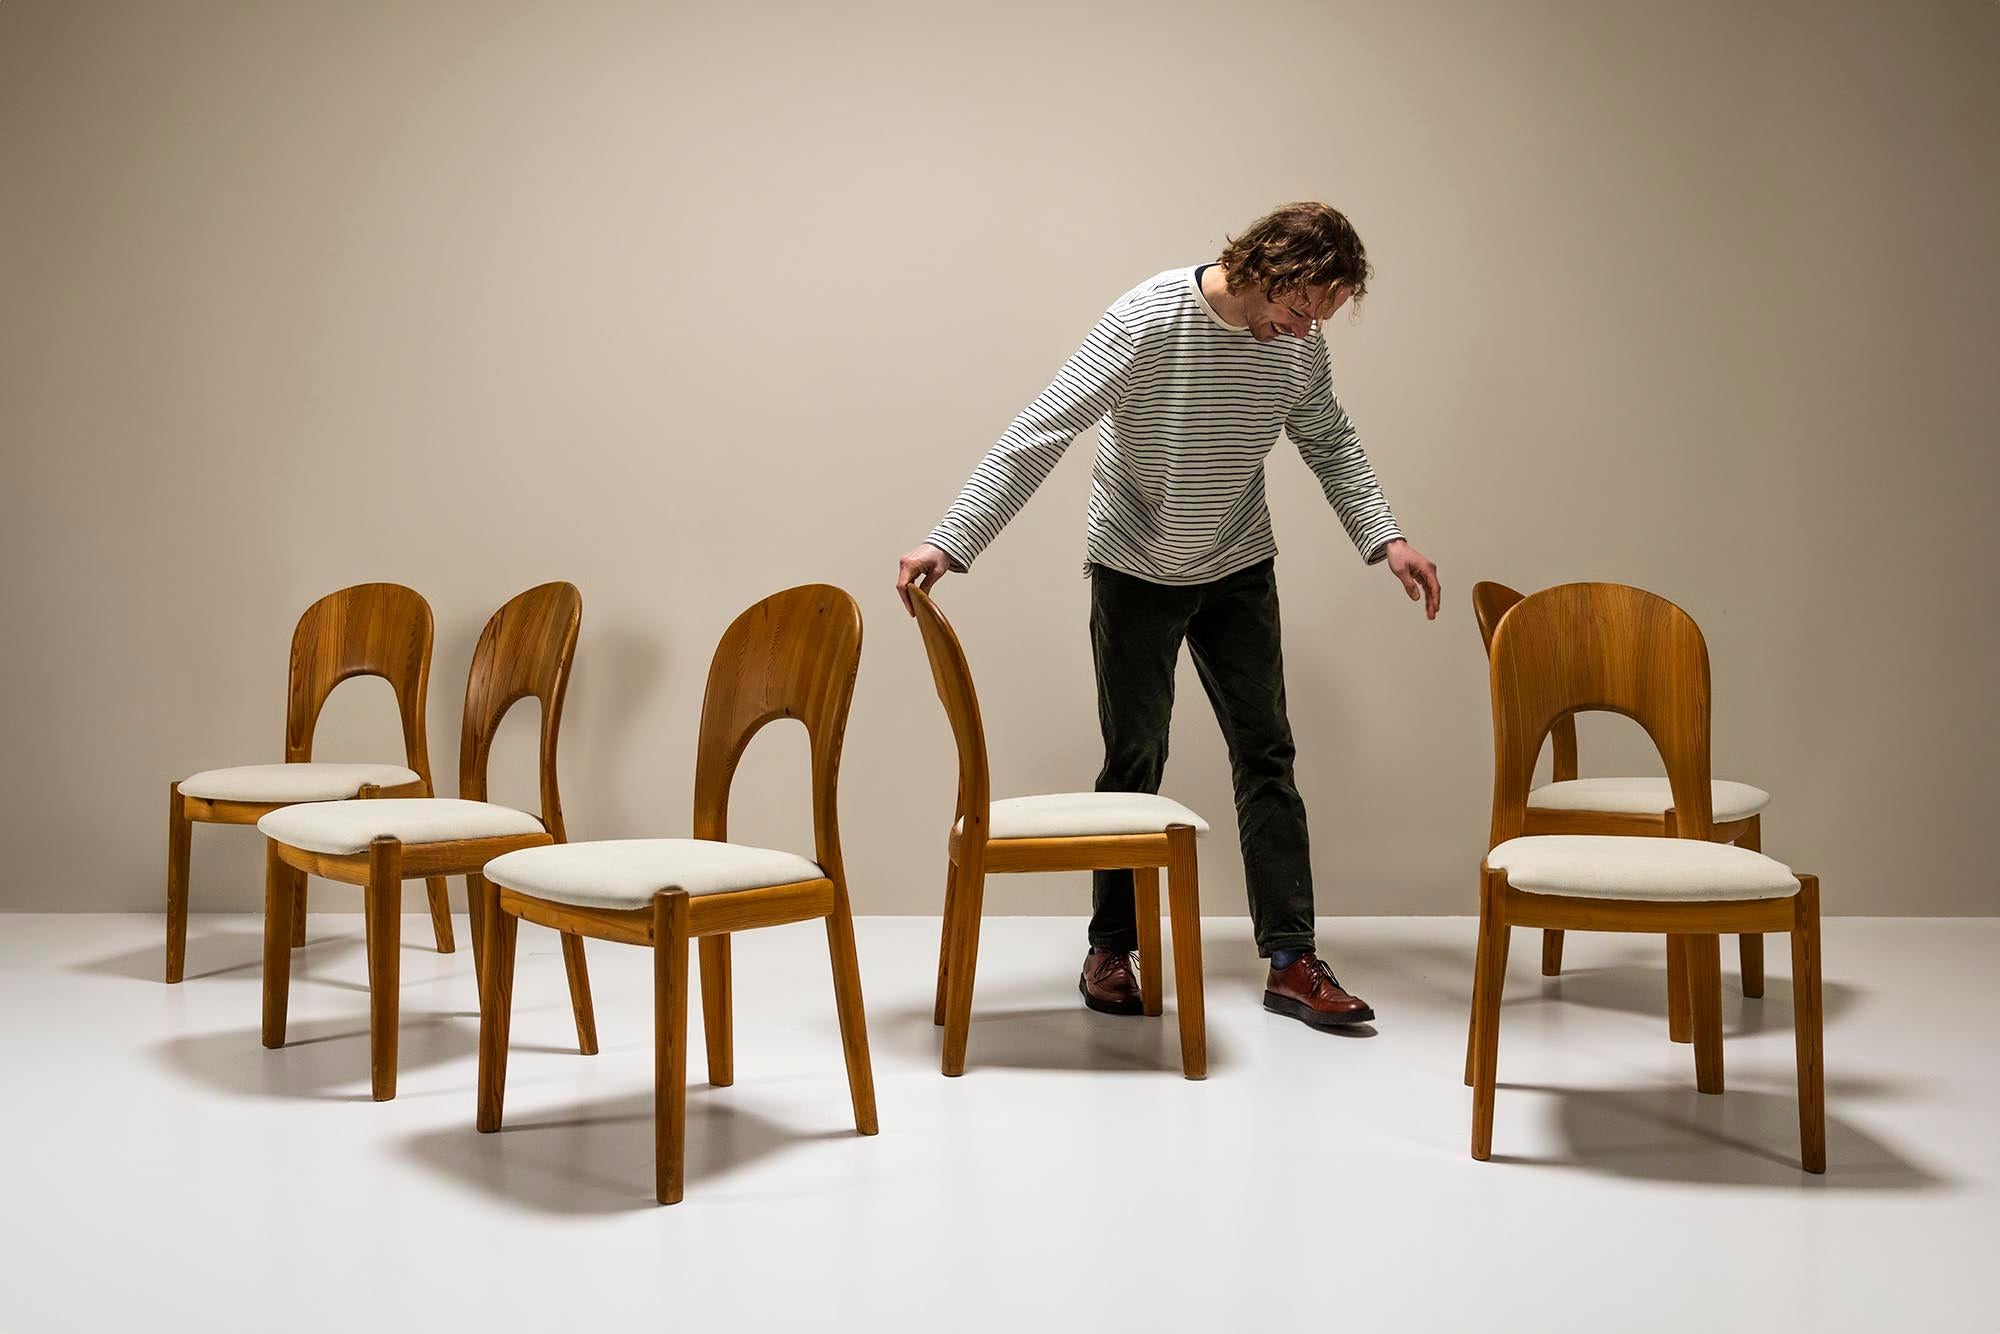 Set of six dining chairs in solid teak by Niels Koefoed, model ‘Morten'. This set of attractive dining chairs is made of solid teak. A remarkable and very characteristic feature of this design is the backrest. This has a sloping shape and is